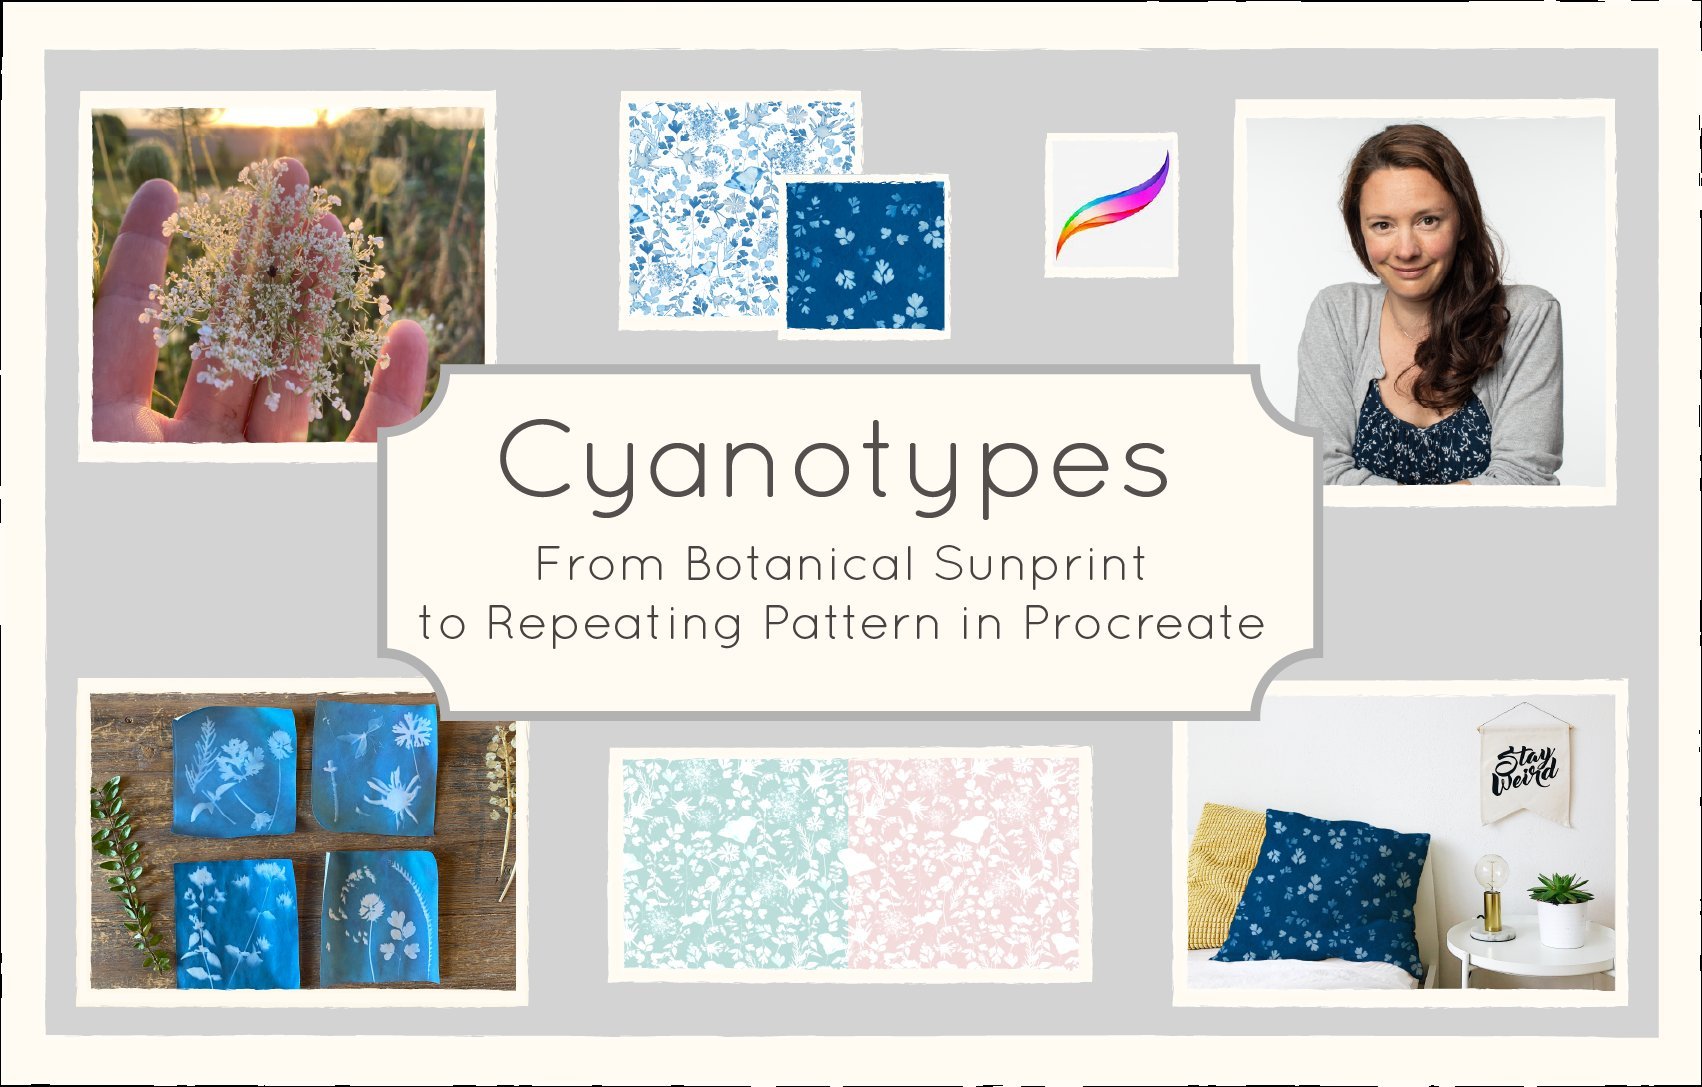 Cyanotypes – From Botanical Sunprint to Repeating Pattern in Procreate